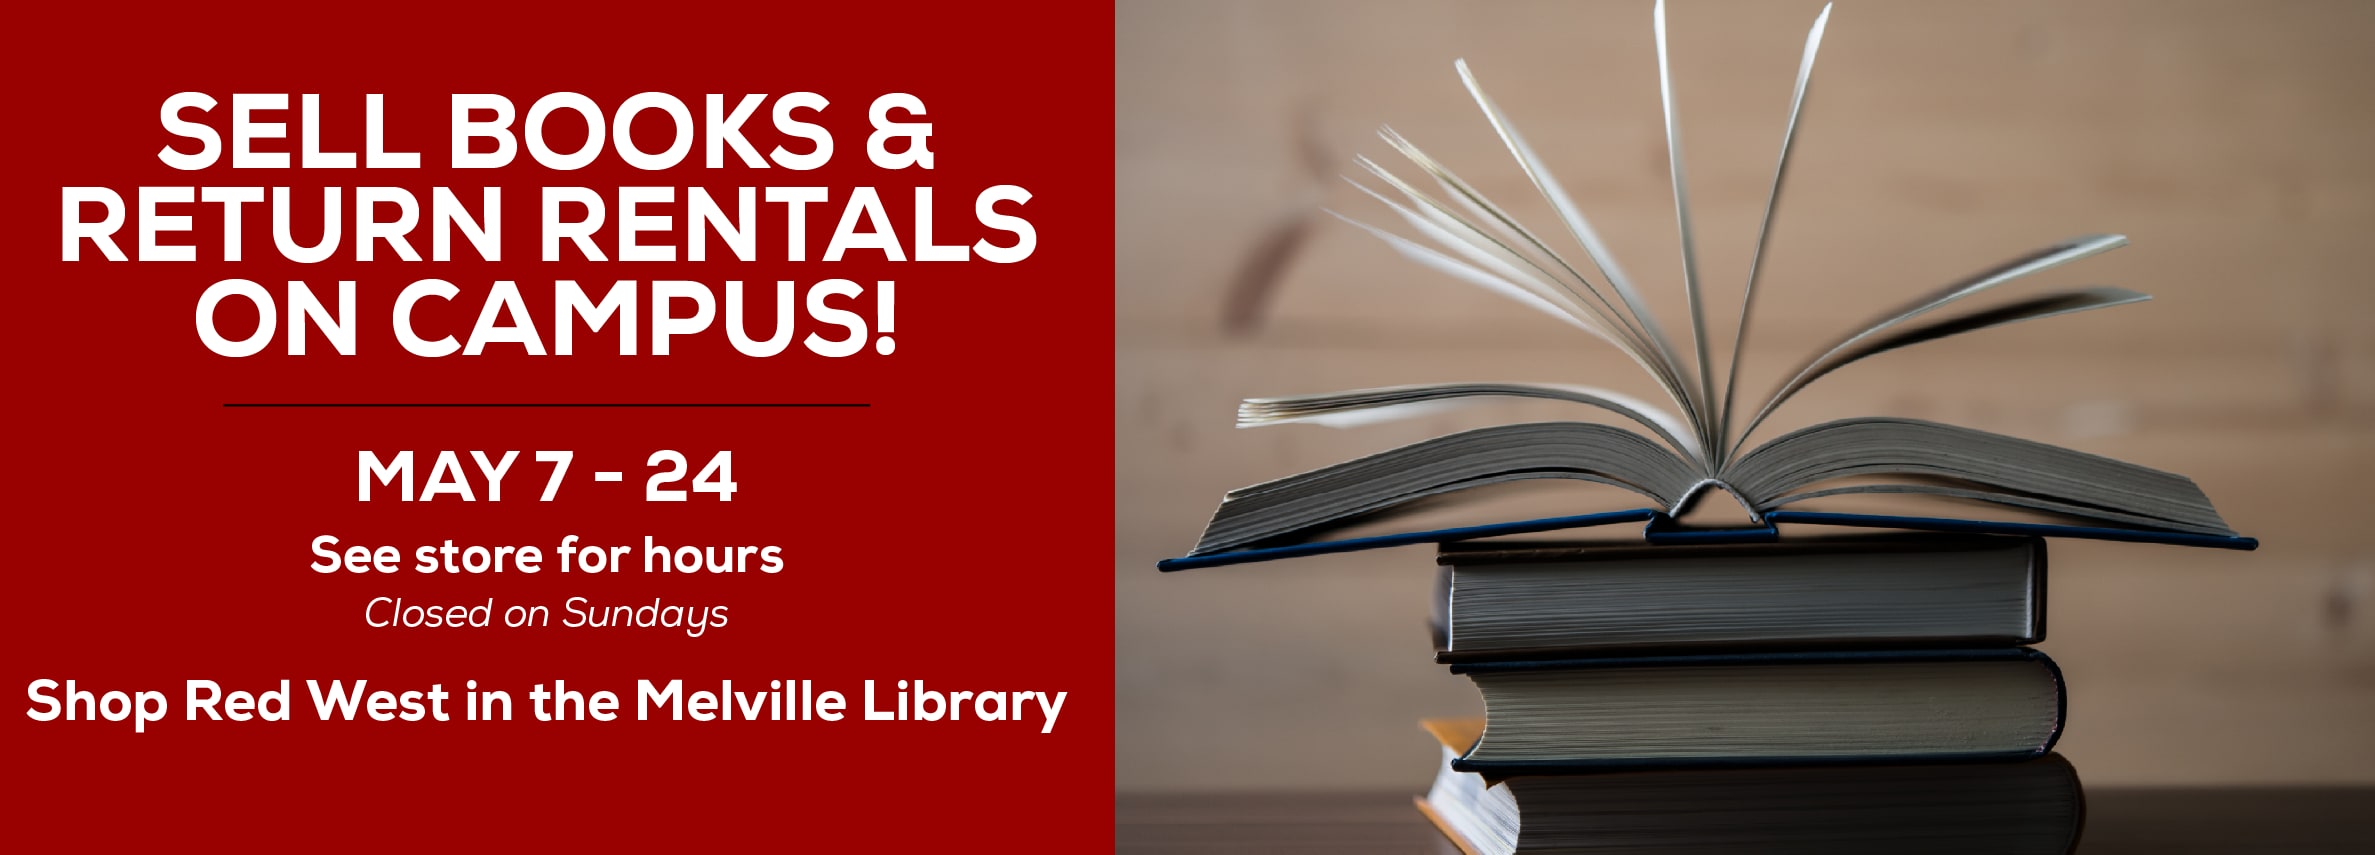 Sell books and return rentals on campus! May 7 - 24. See store for hours. Closed on Sundays. Shop Red West in the Melville Library